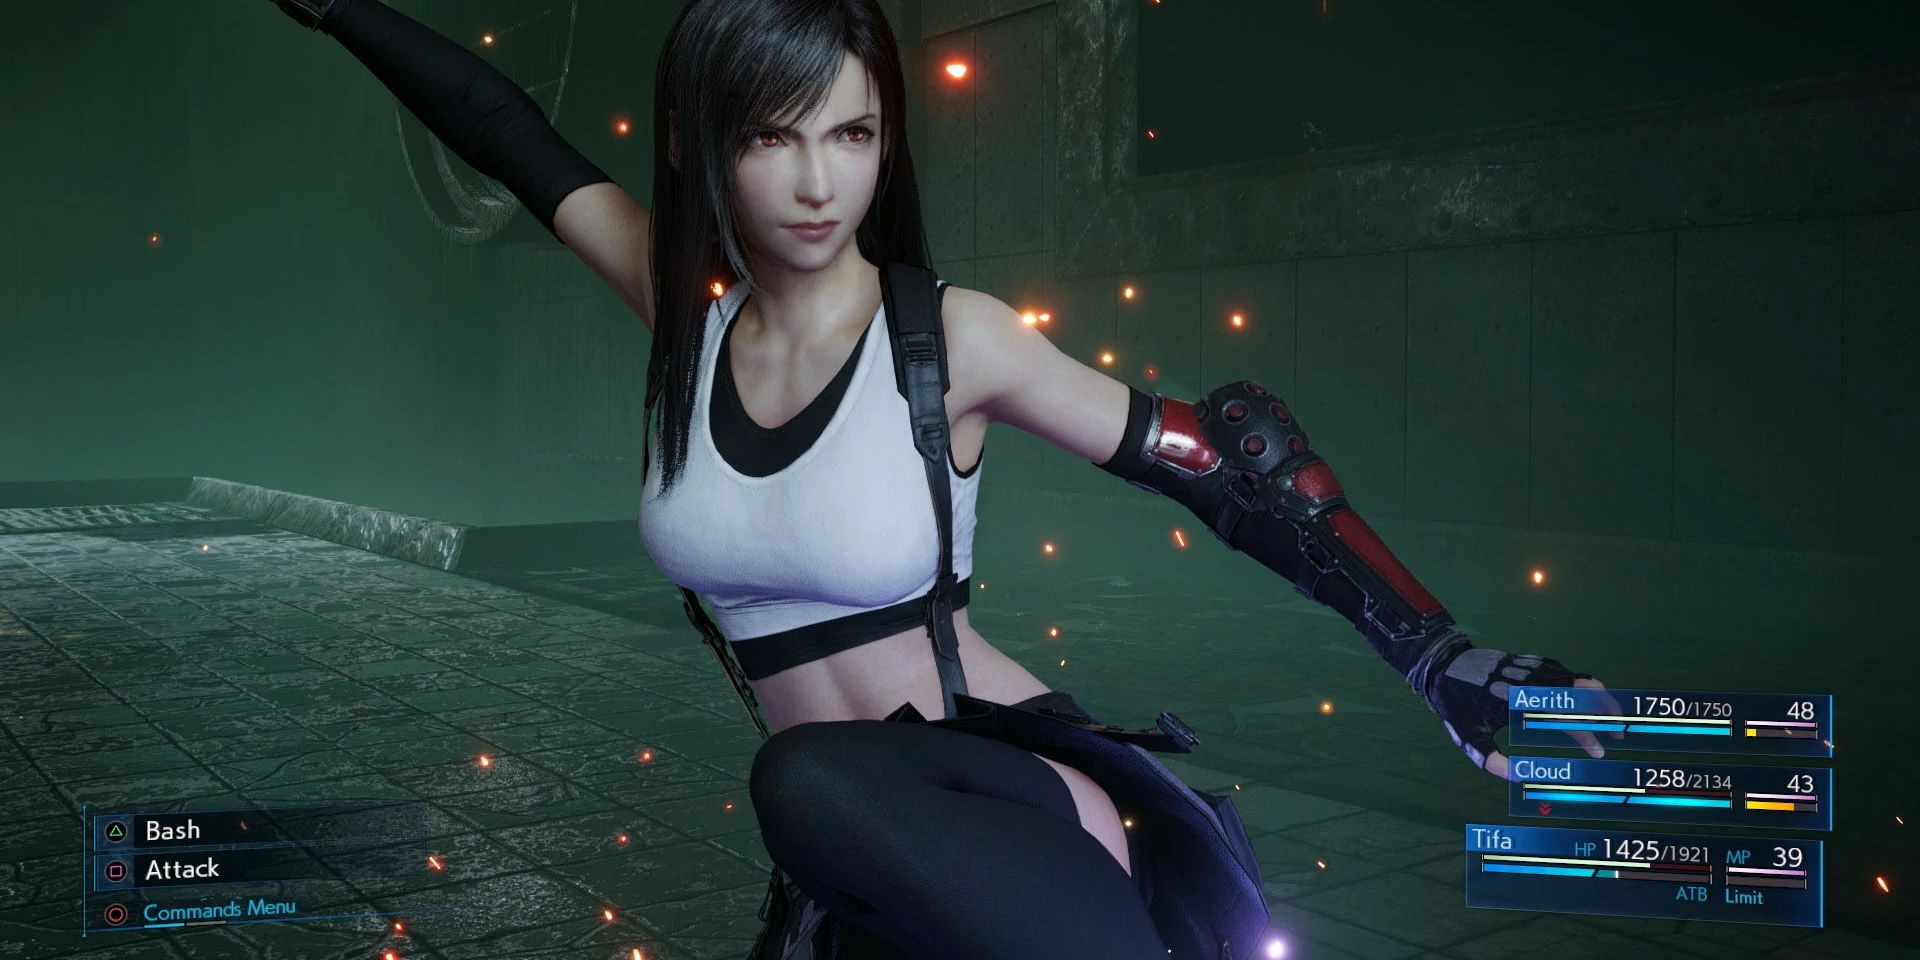 Tifa prepares to use an ability in Final Fantasy VII Remake